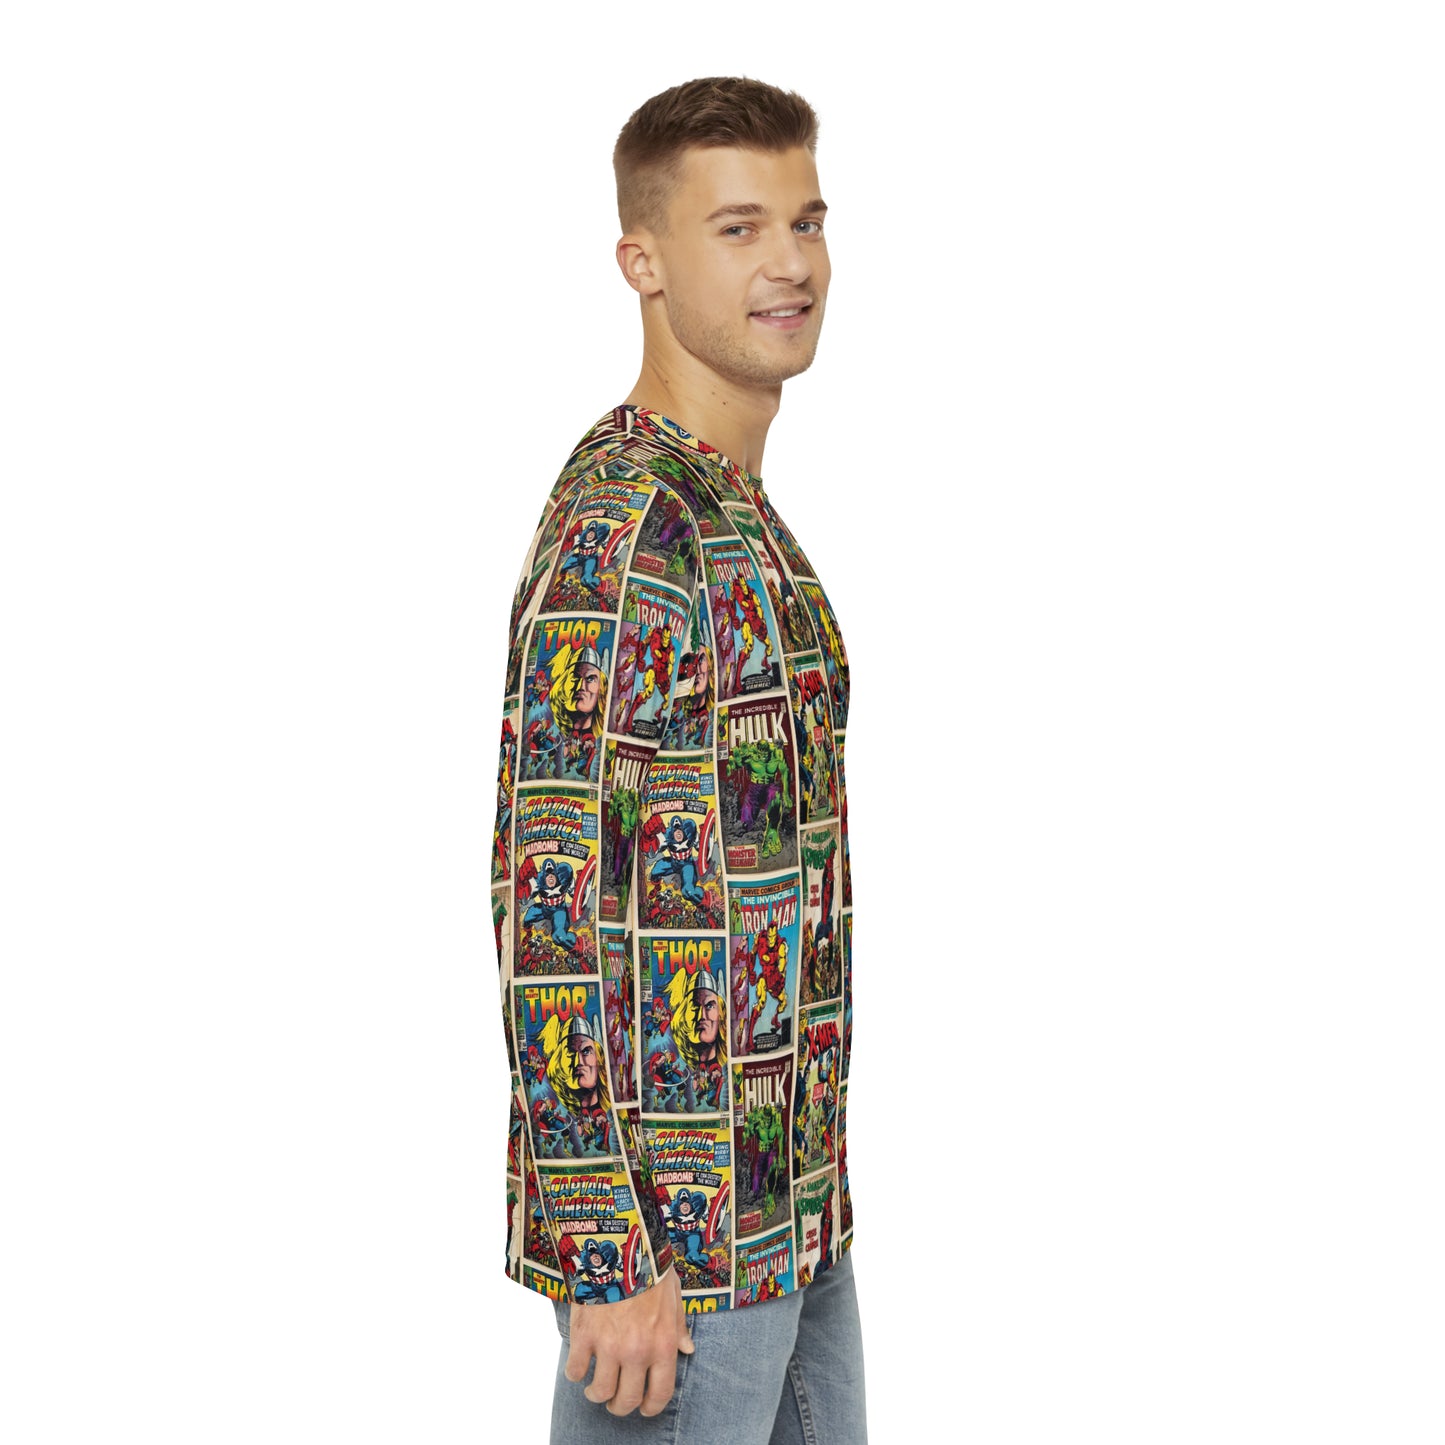 Marvel Comic Book Cover Collage Men's Long Sleeve Tee Shirt